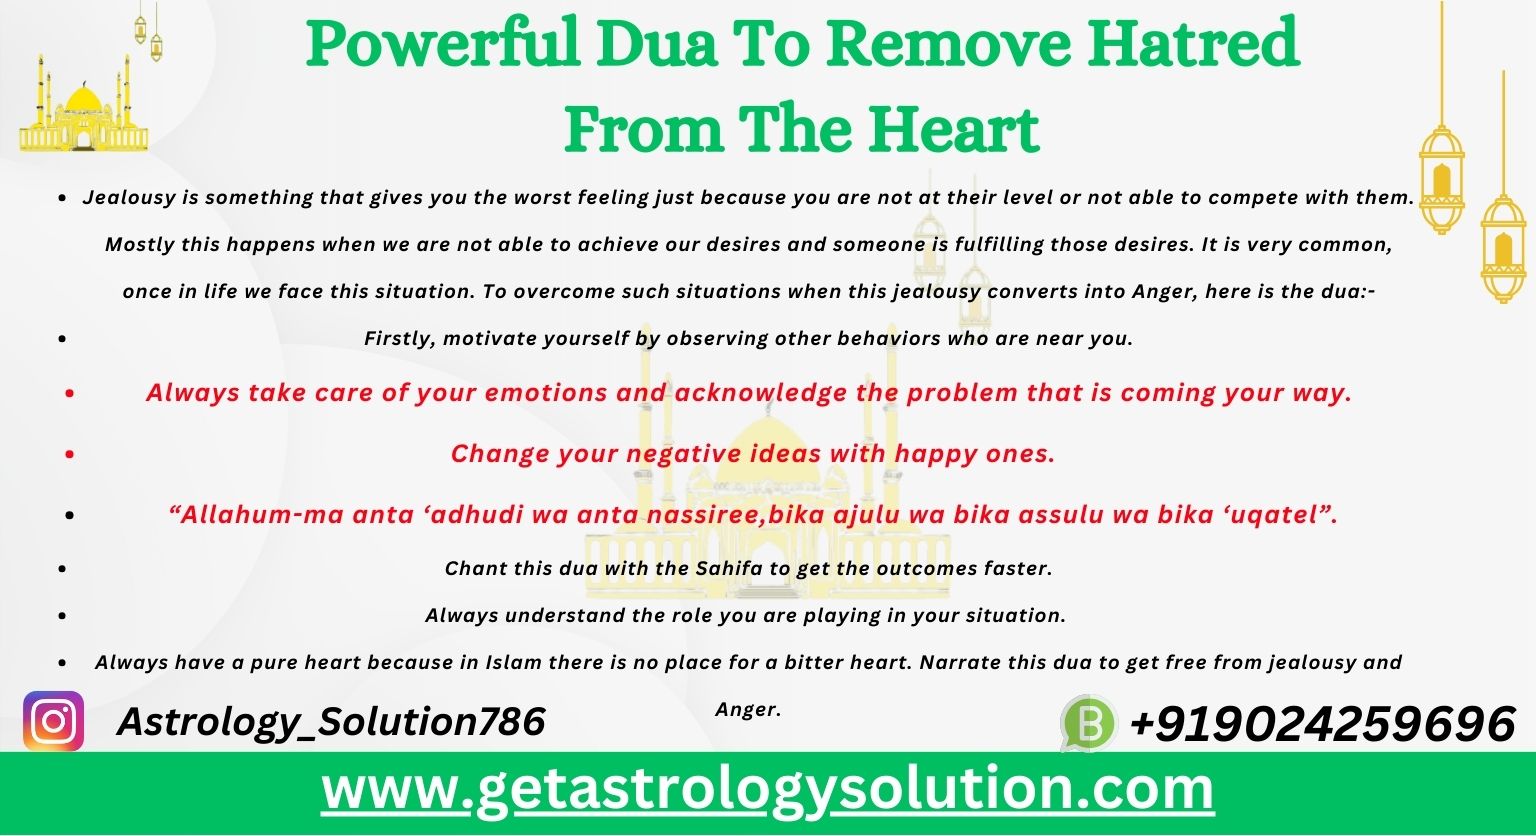 Powerful Dua To Remove Hatred From The Heart